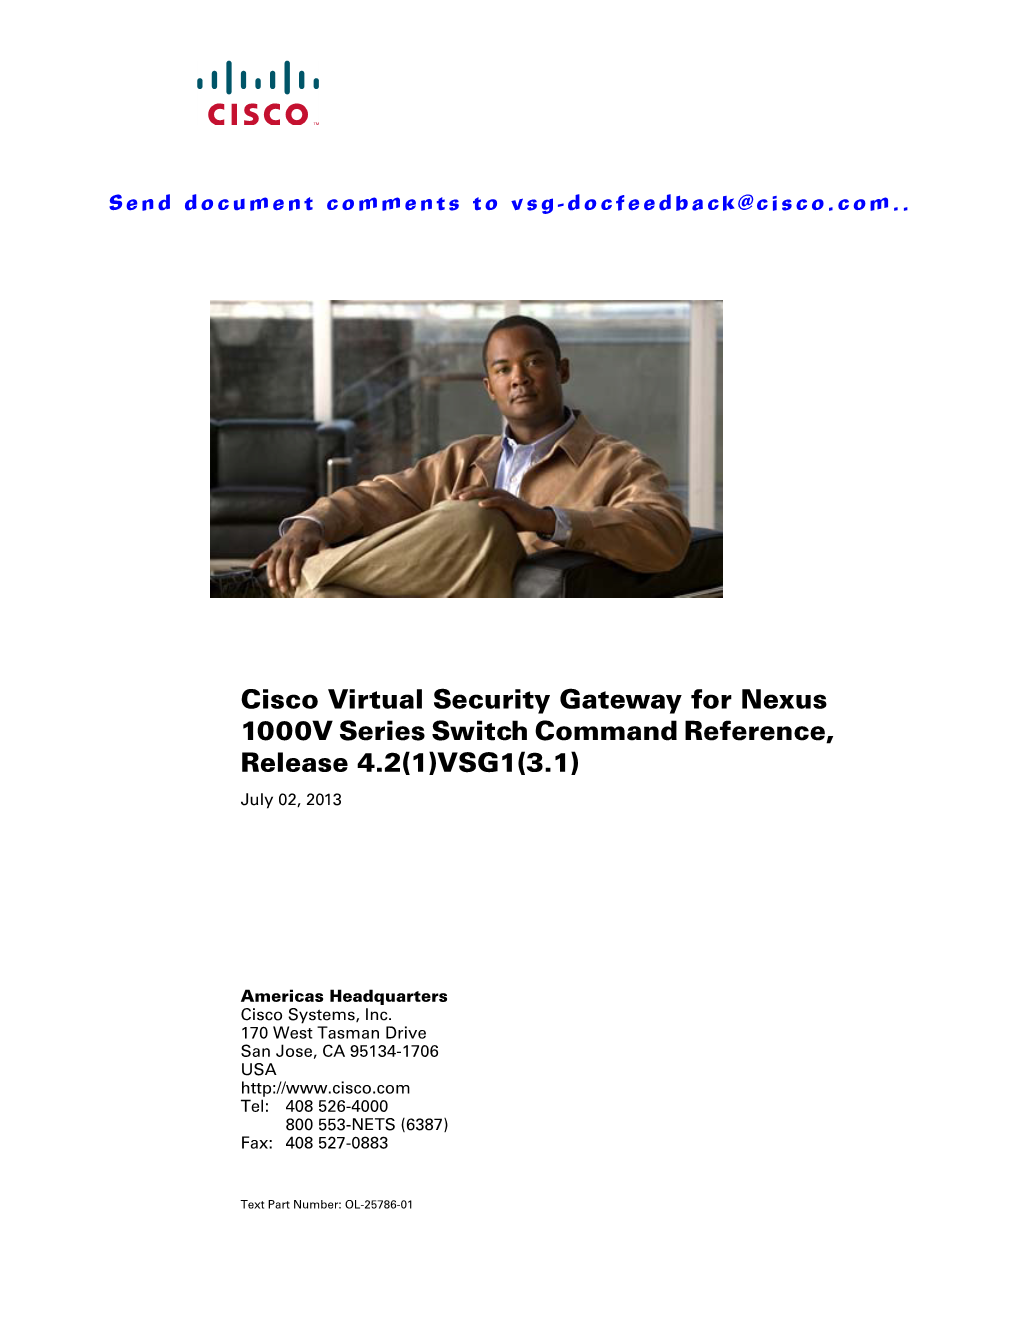 Cisco Virtual Security Gateway for Nexus 1000V Series Switch Command Reference, Release 4.2(1)VSG1(3.1) July 02, 2013